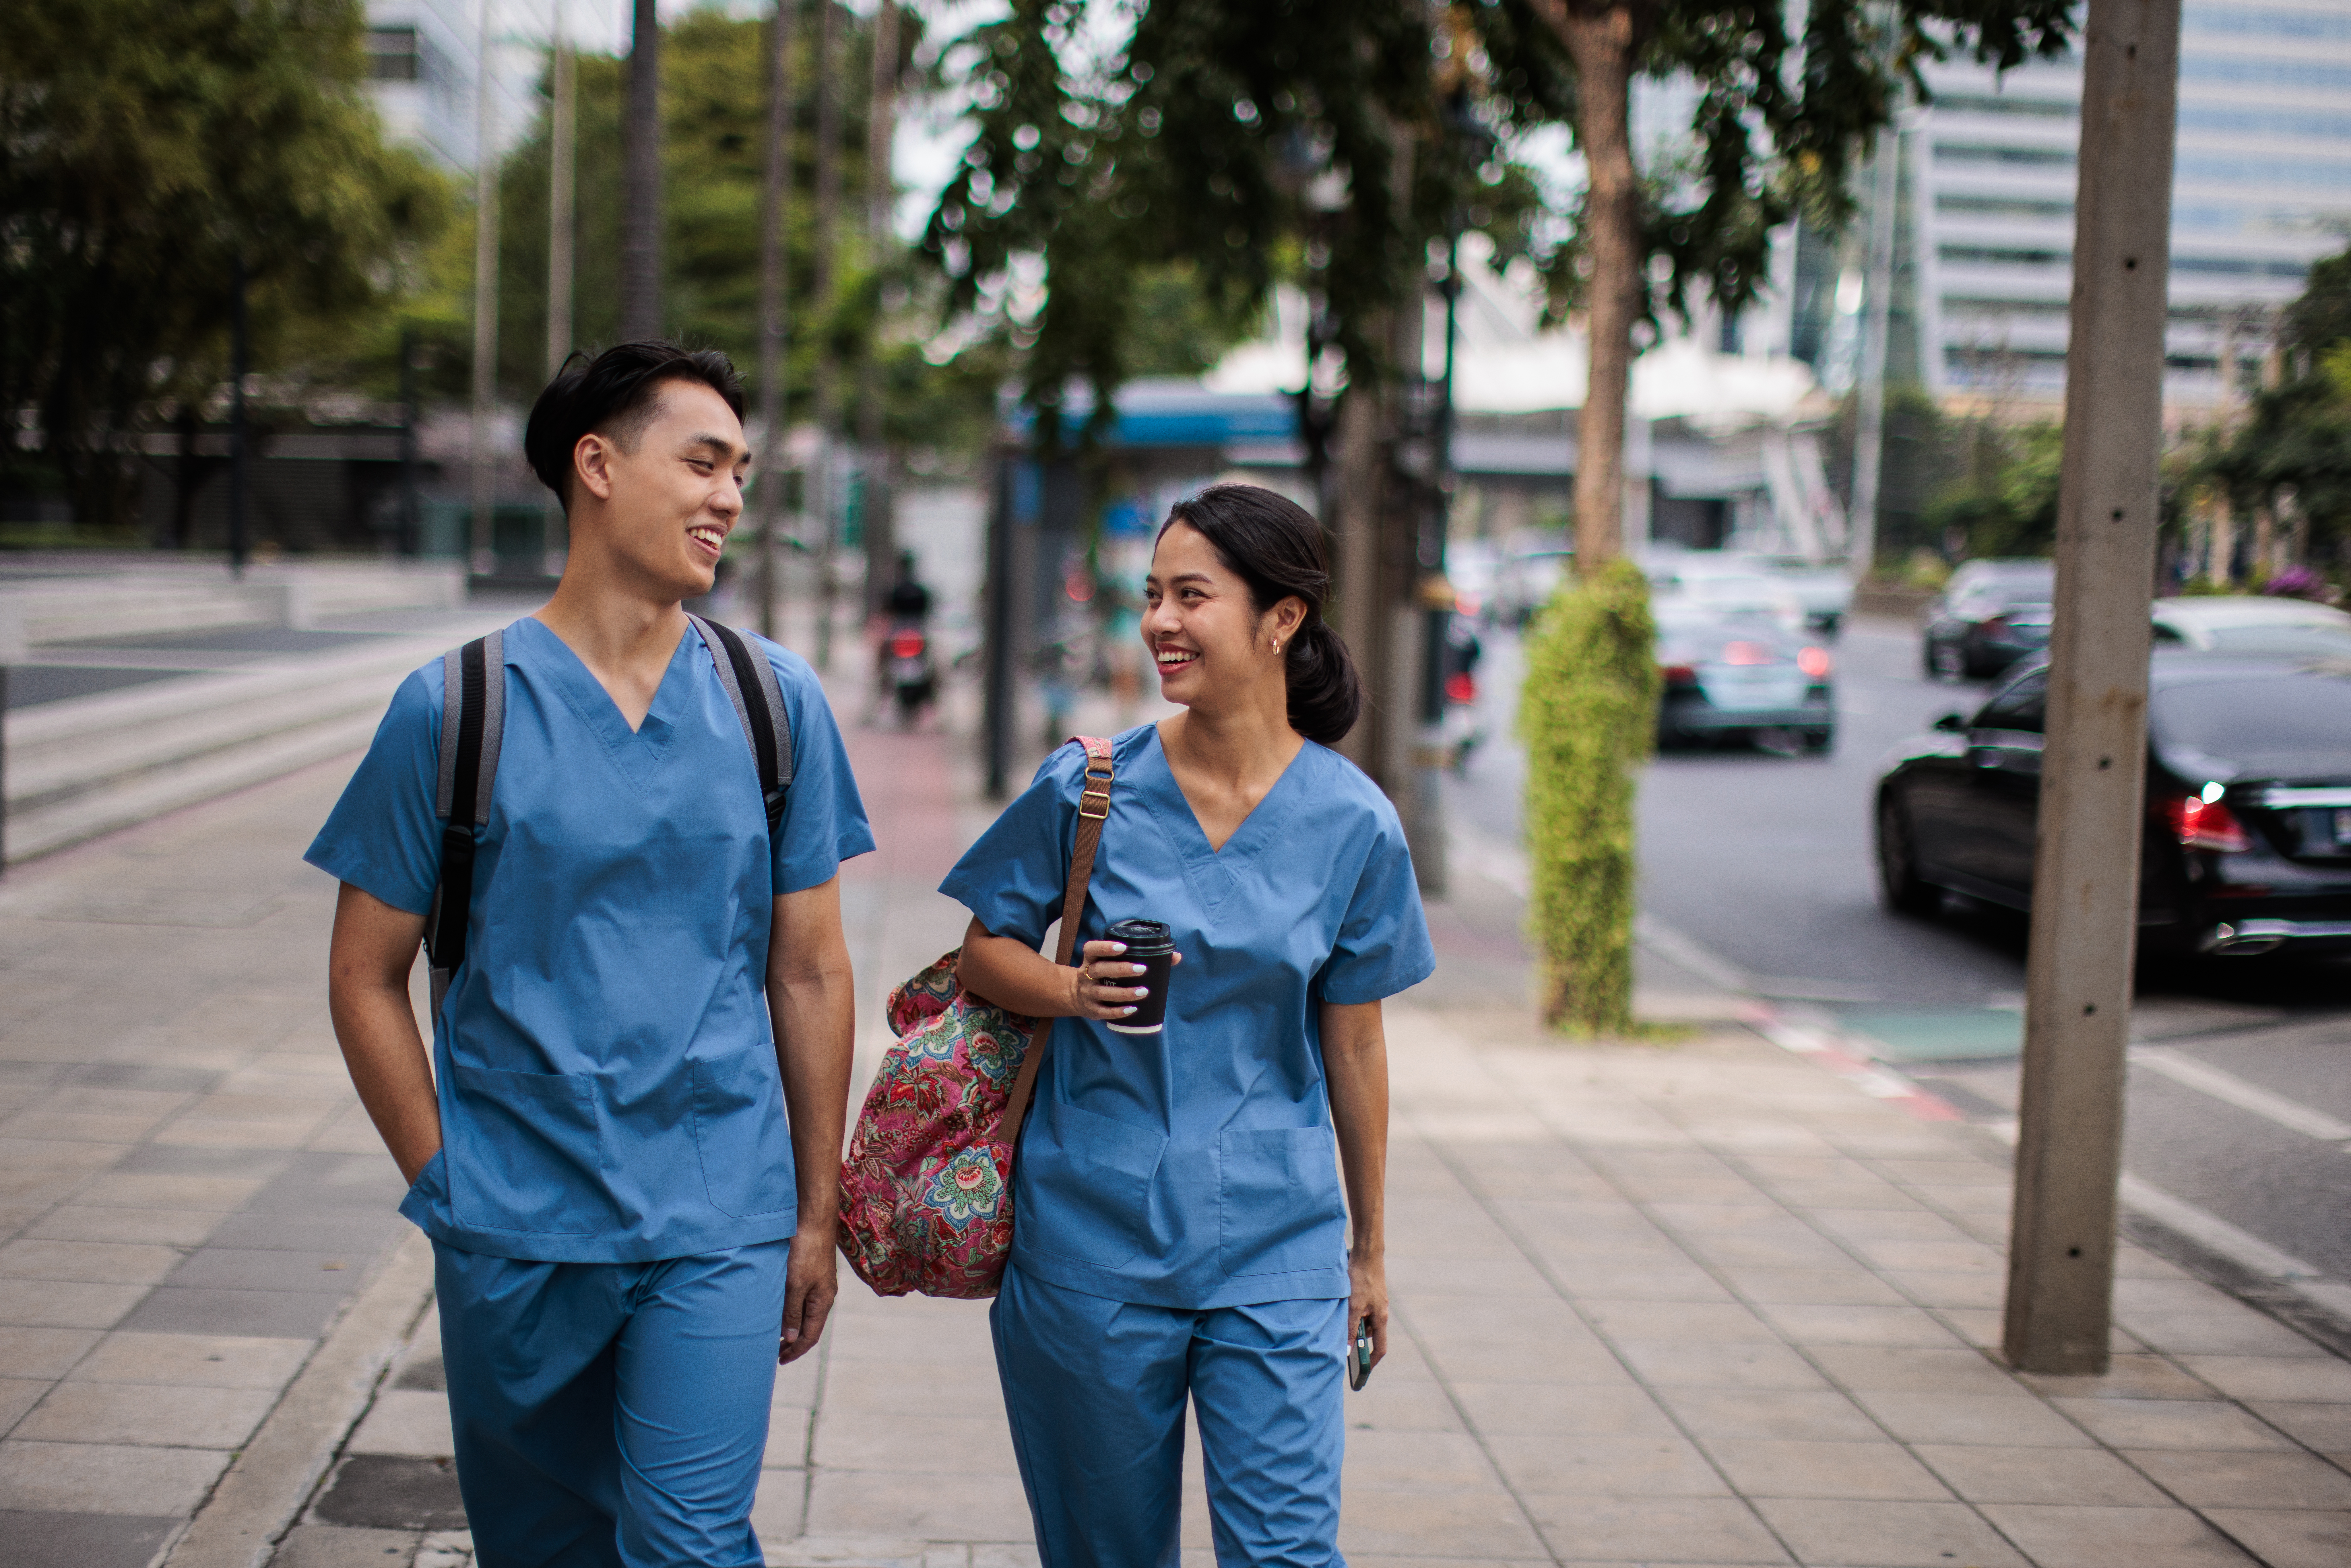 Man and woman healthcare workers in medical scrubs walking to work on the street together.